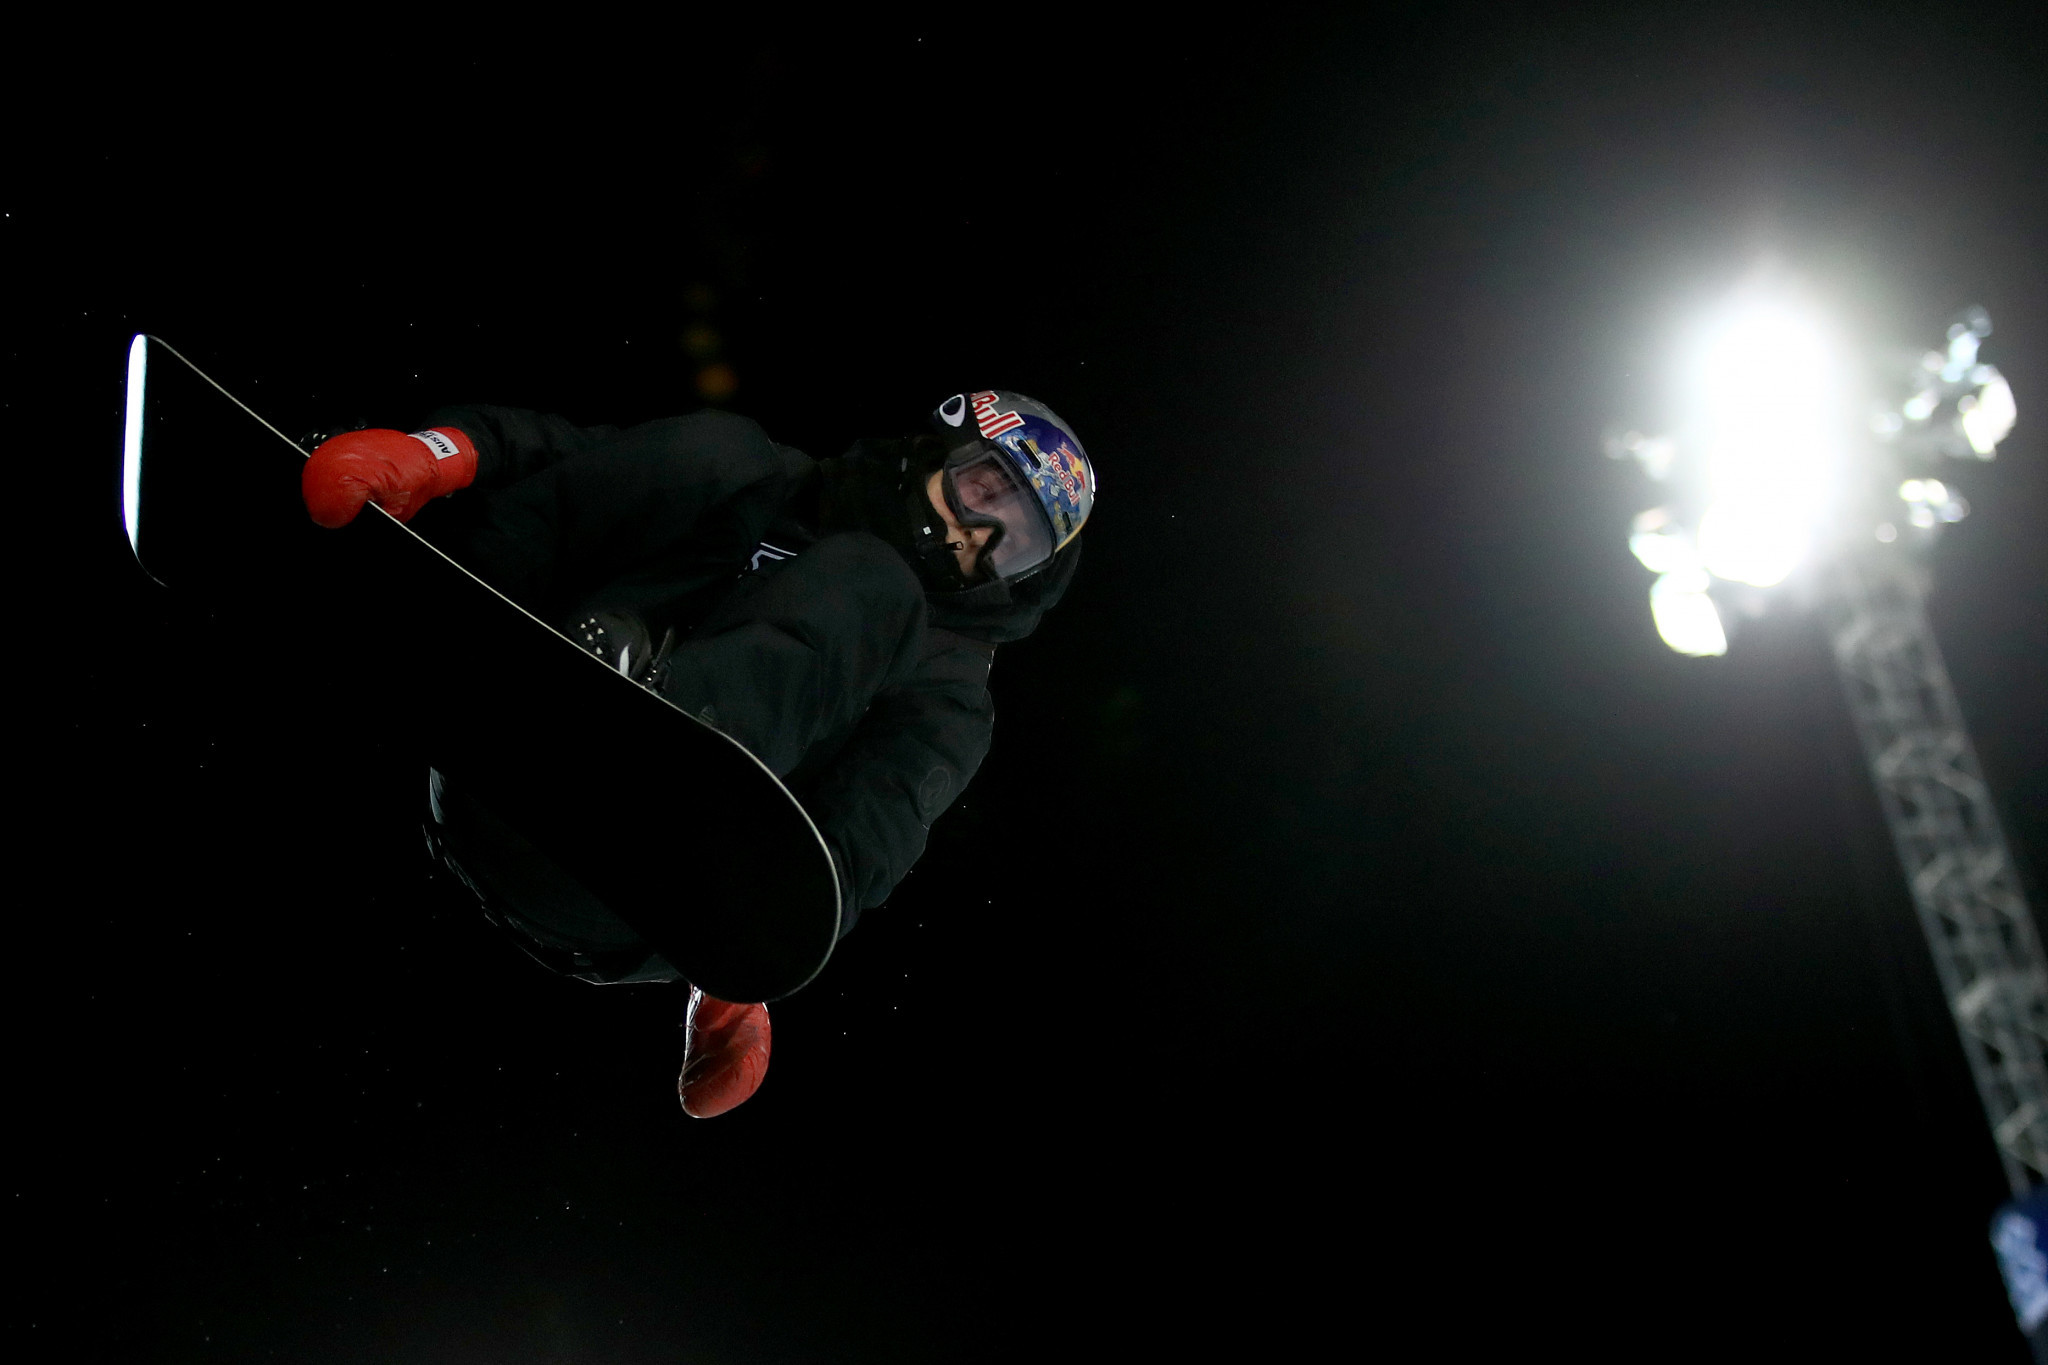 Olympic bronze medallist Scotty James triumphed in the men's snowboard superpipe event ©Getty Images